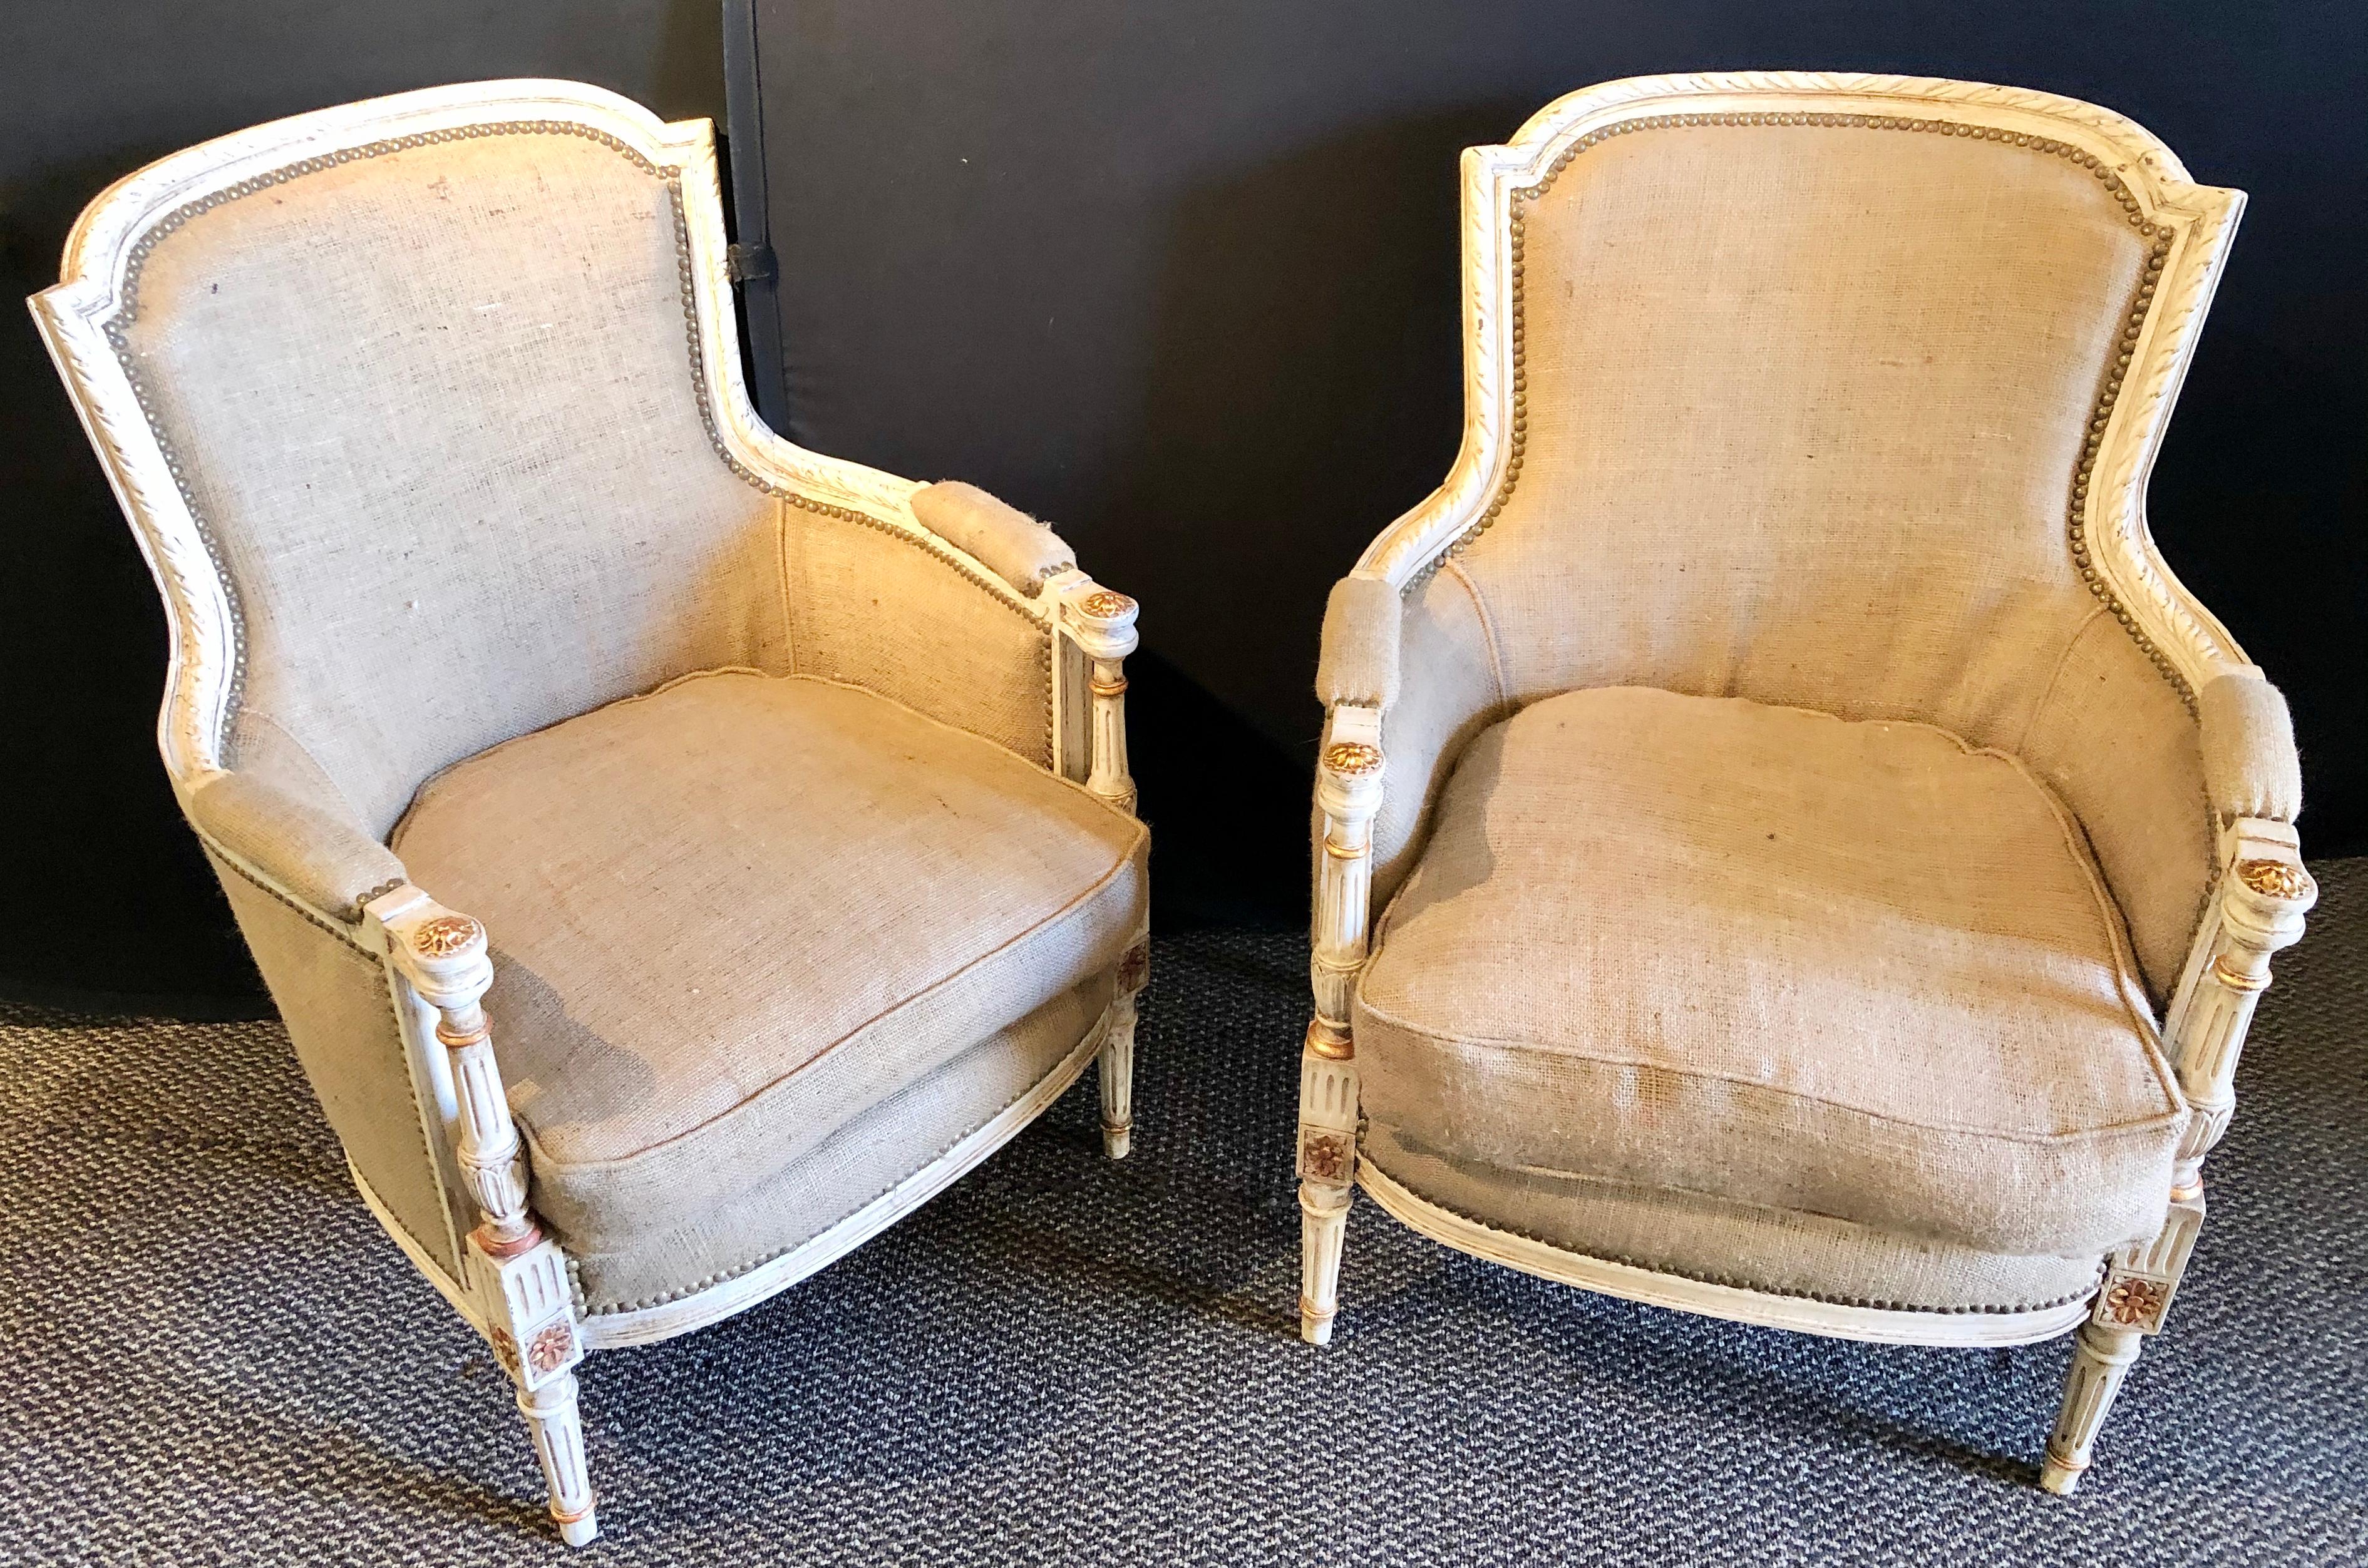 Pair of Jansen parcel-gilt and paint decorated Louis XVI bergère or armchairs. Each having a new burlap upholstery covering with new springs and welts. The paint decorated and parcel gilt frames reminiscent of this highly sought after designers work